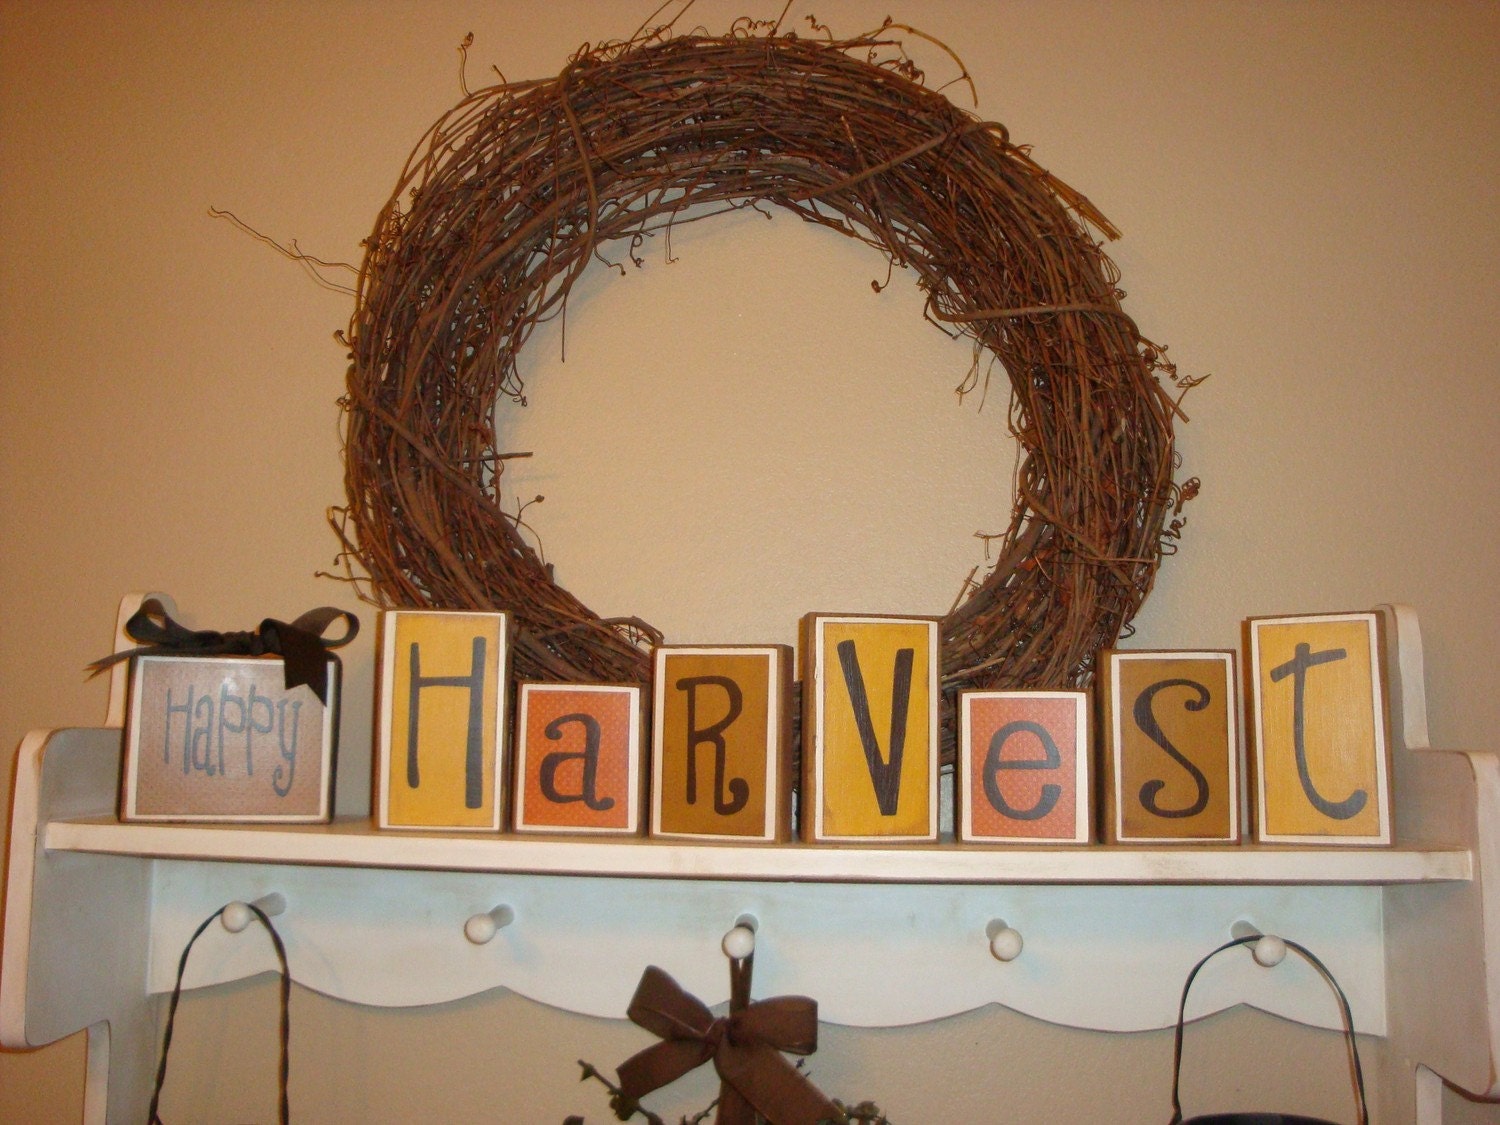 Happy HARVEST wood block set . . . check out the listing for more pictures of this super cute block set